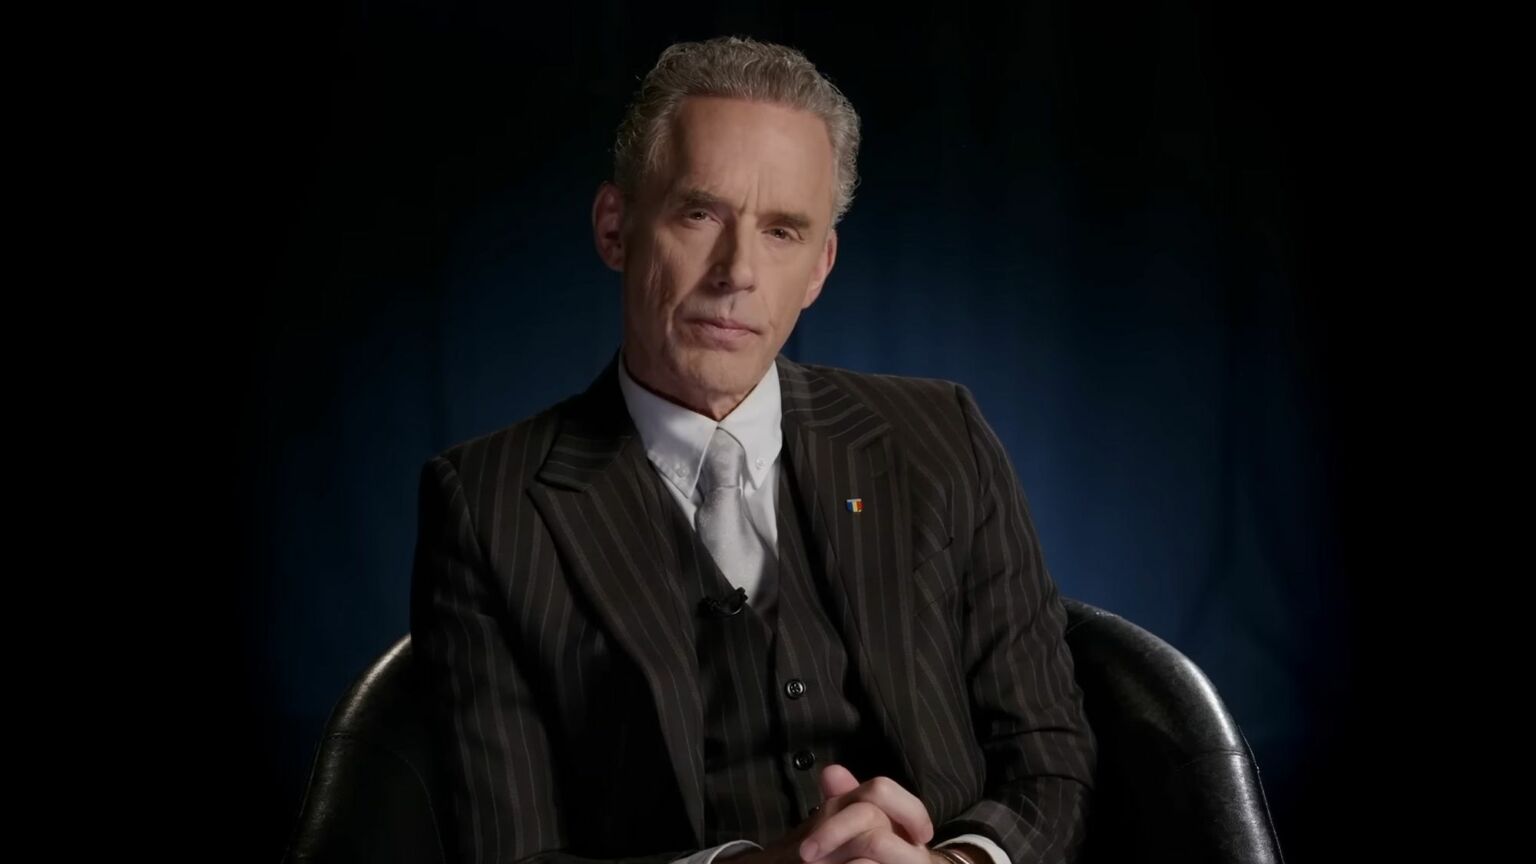 Jordan Peterson wearing a suit on a white shirt sitting on a chair